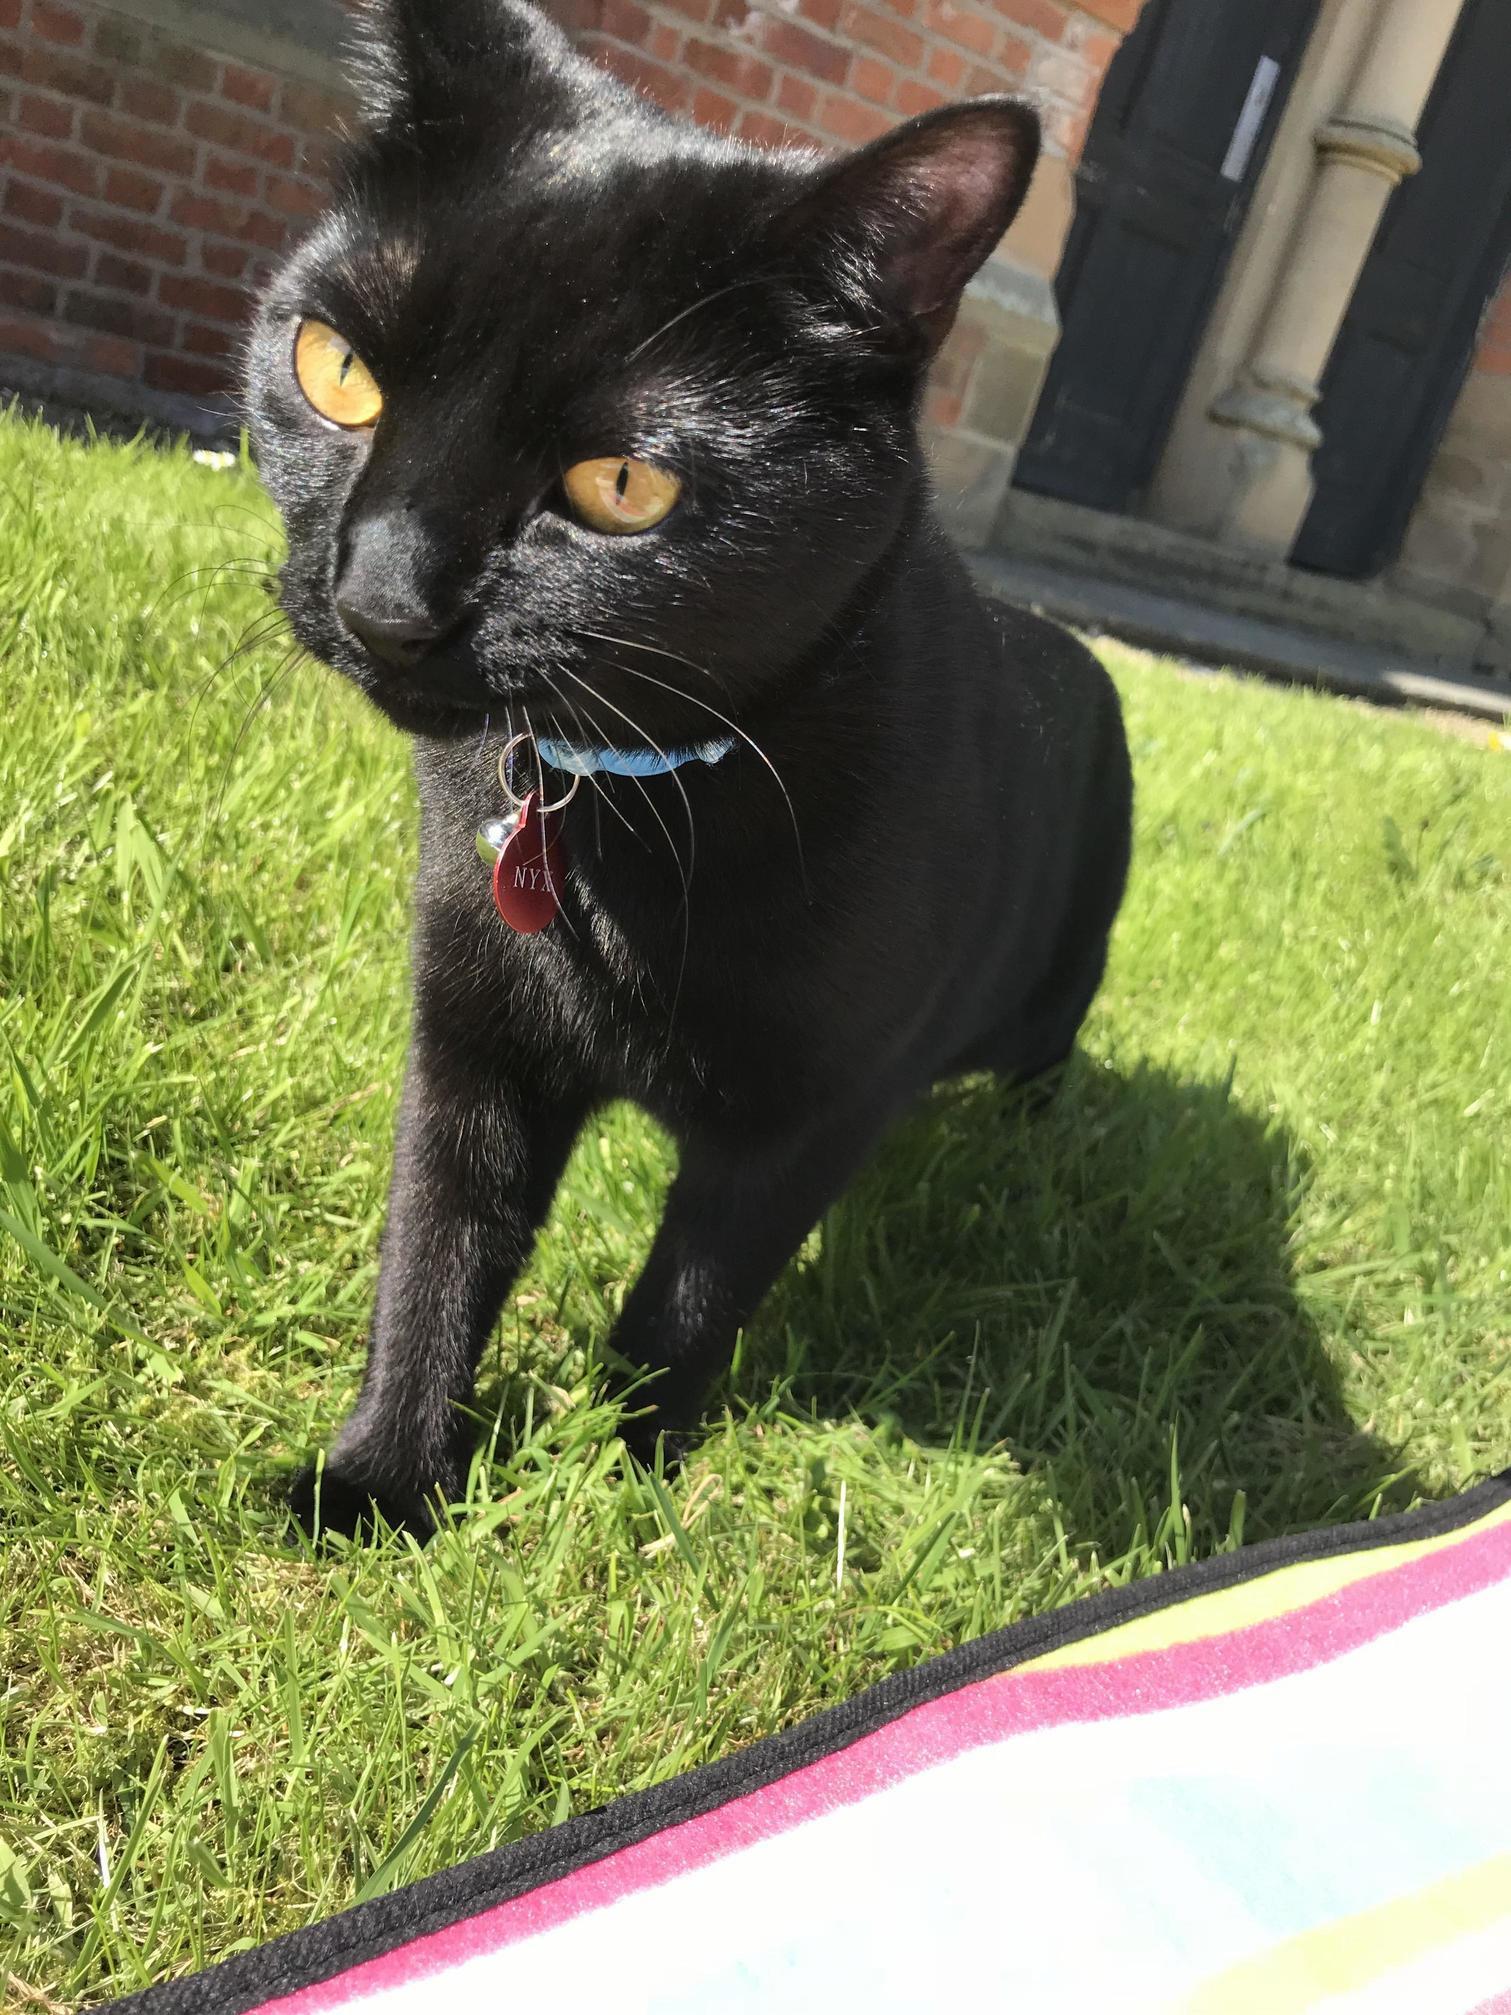 My little lady came outside today for the first time! here she is enjoying the grass in the sunshine!